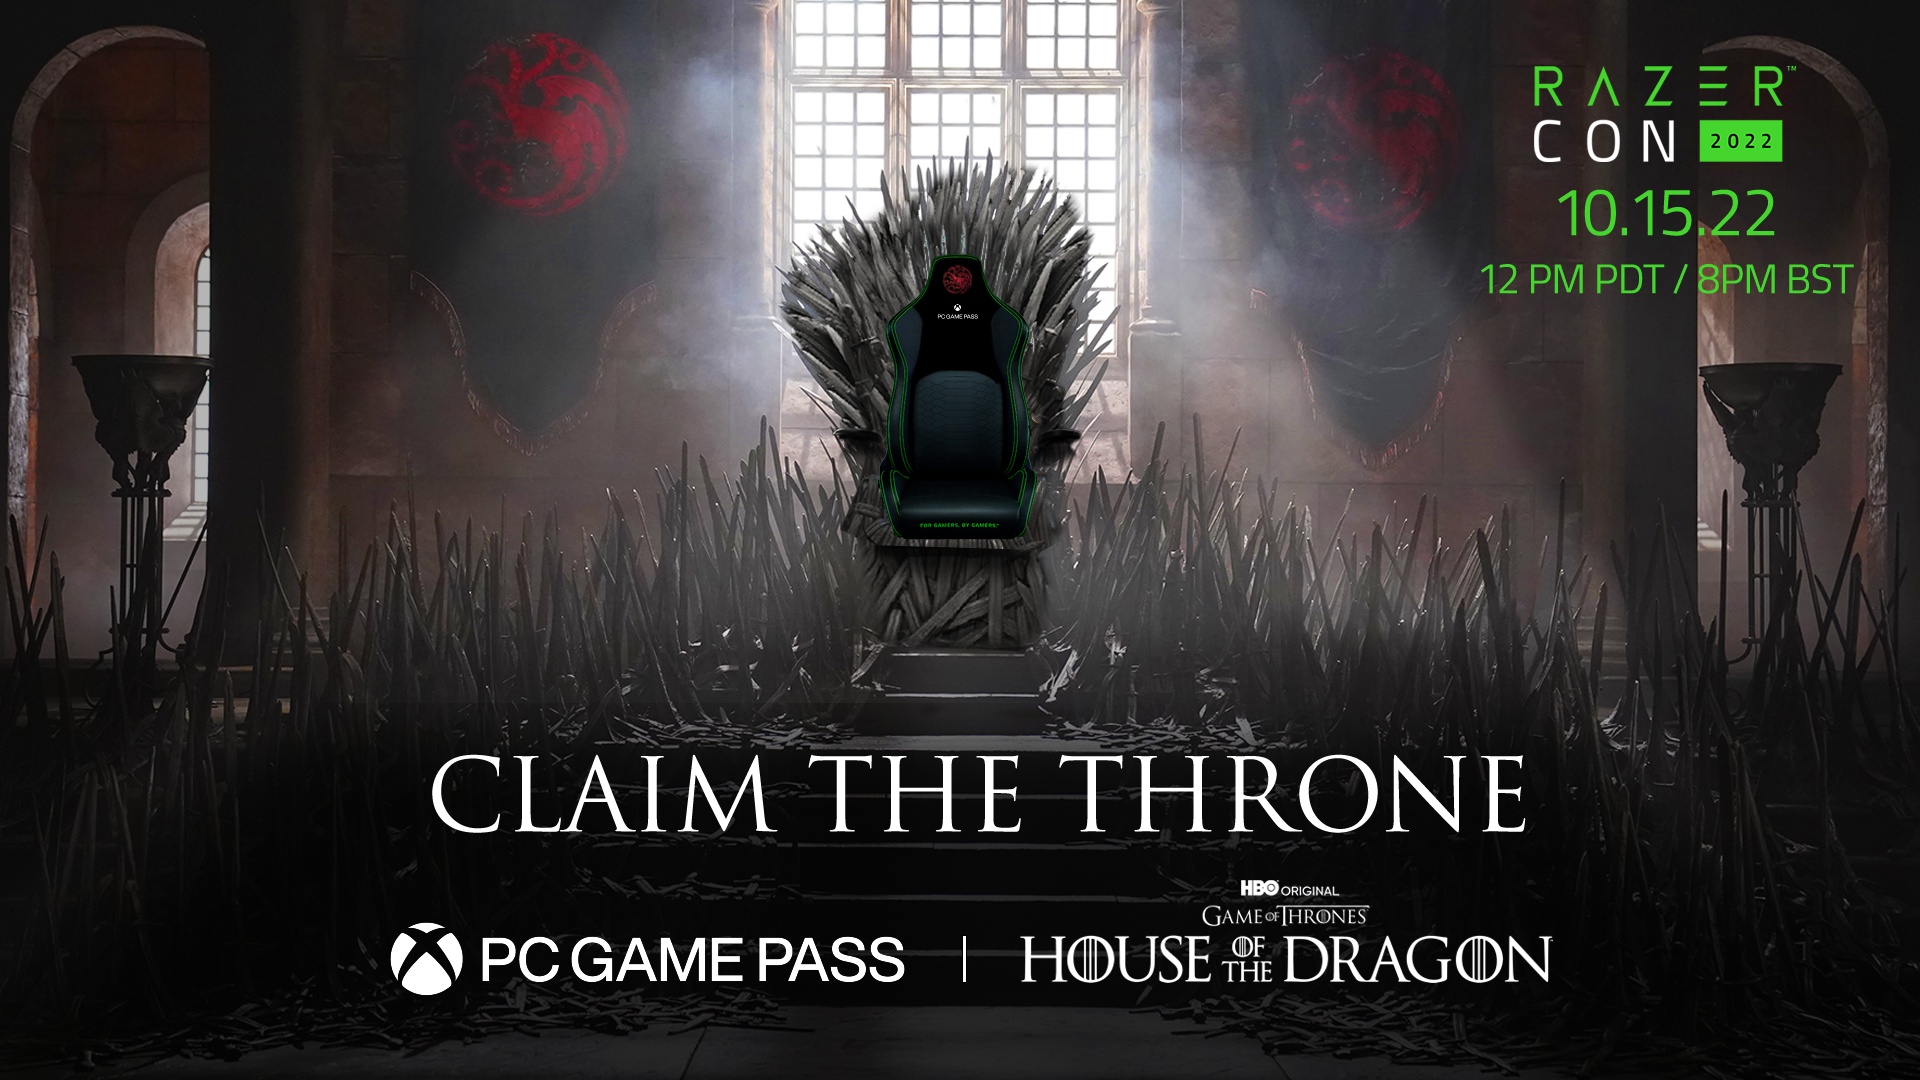 Find Out Who Will Sit Upon the PC Game Pass House of the Dragon Gaming Throne